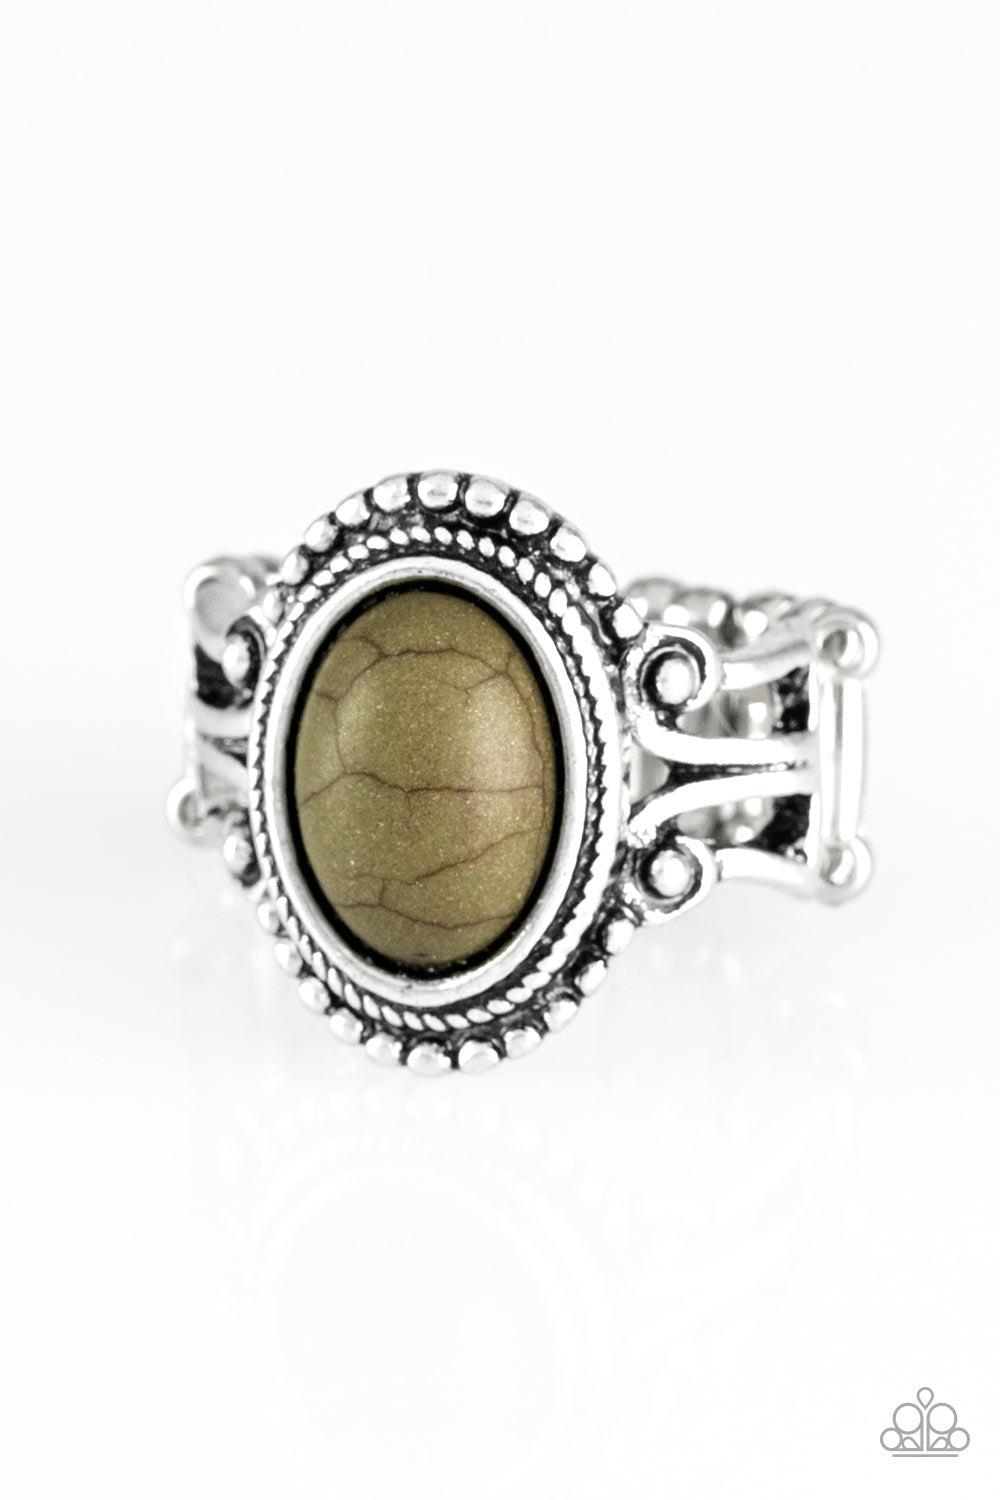 All The World's A STAGECOACH Green Stone Ring - Paparazzi Accessories-CarasShop.com - $5 Jewelry by Cara Jewels